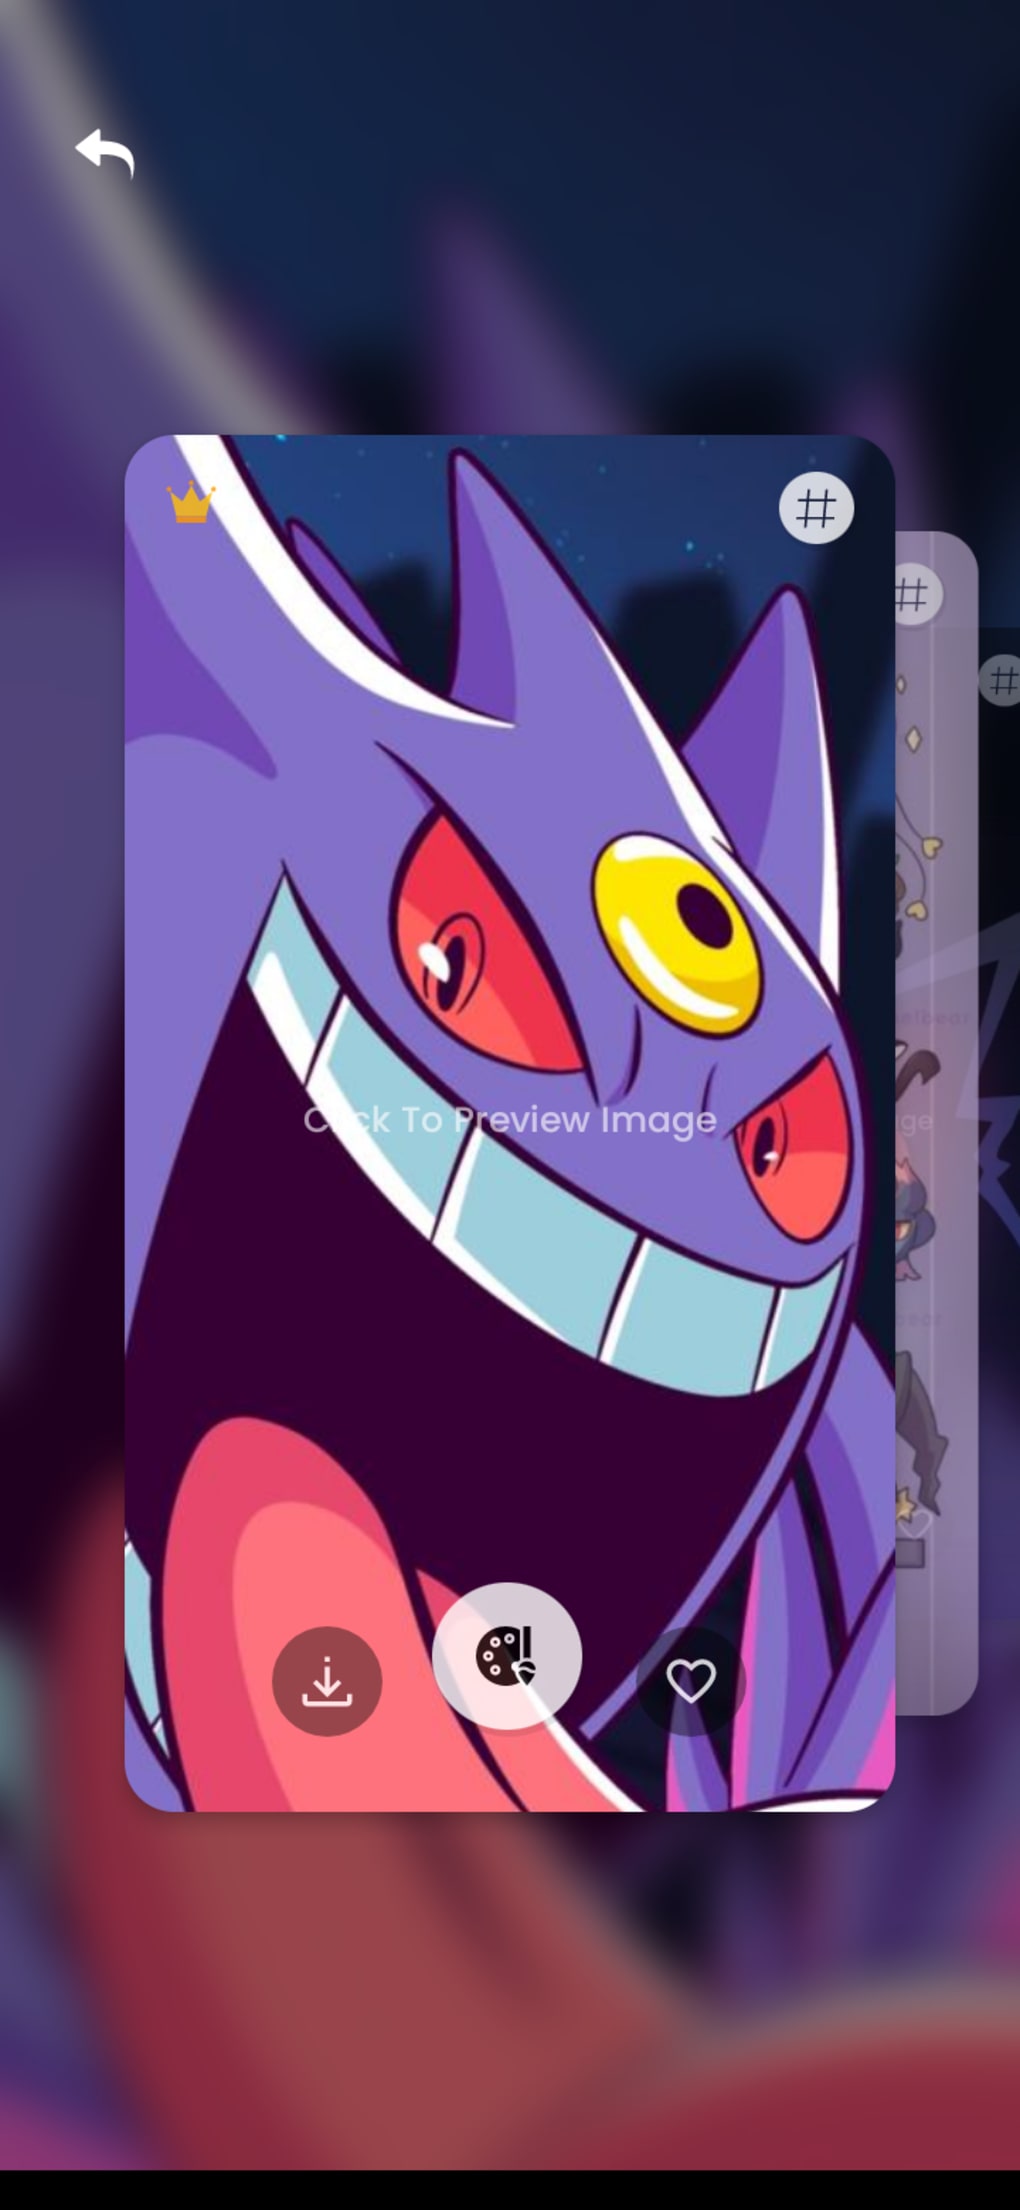 Gengar HD Wallpapers 1000 Free Gengar Wallpaper Images For All Devices